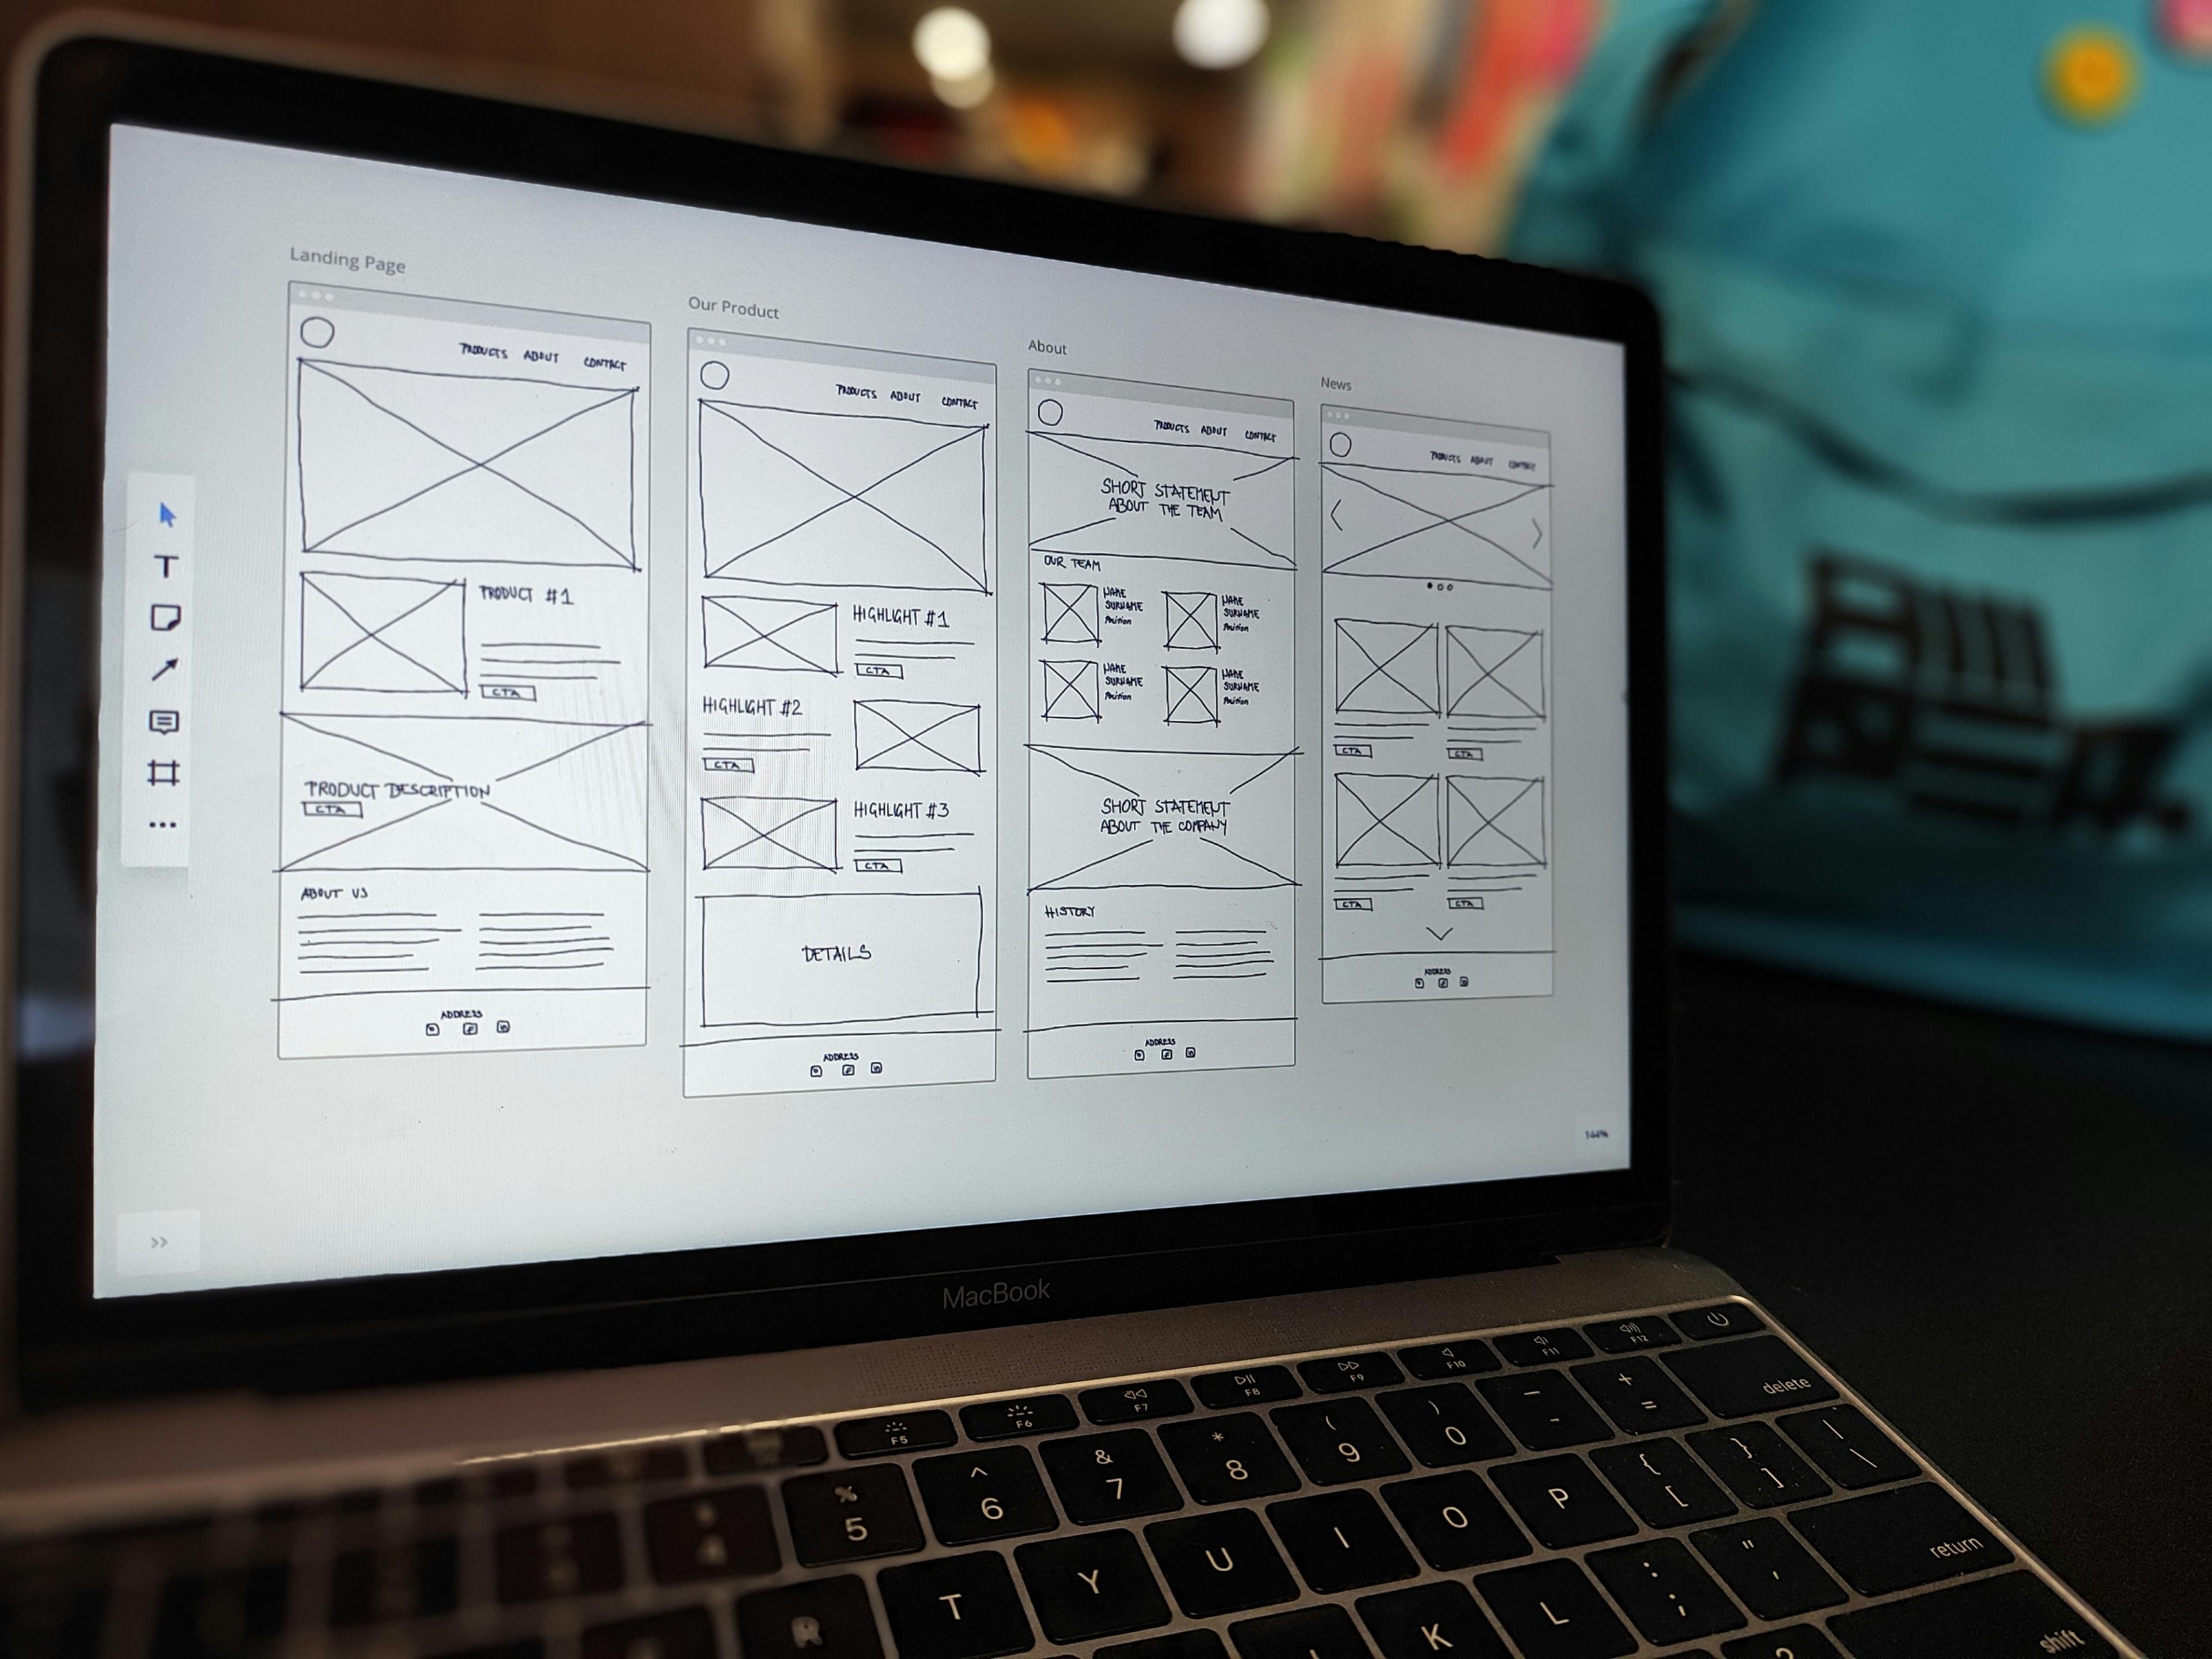 “[usability storyboard] including # of storyboards telling the story of an ad campaign”